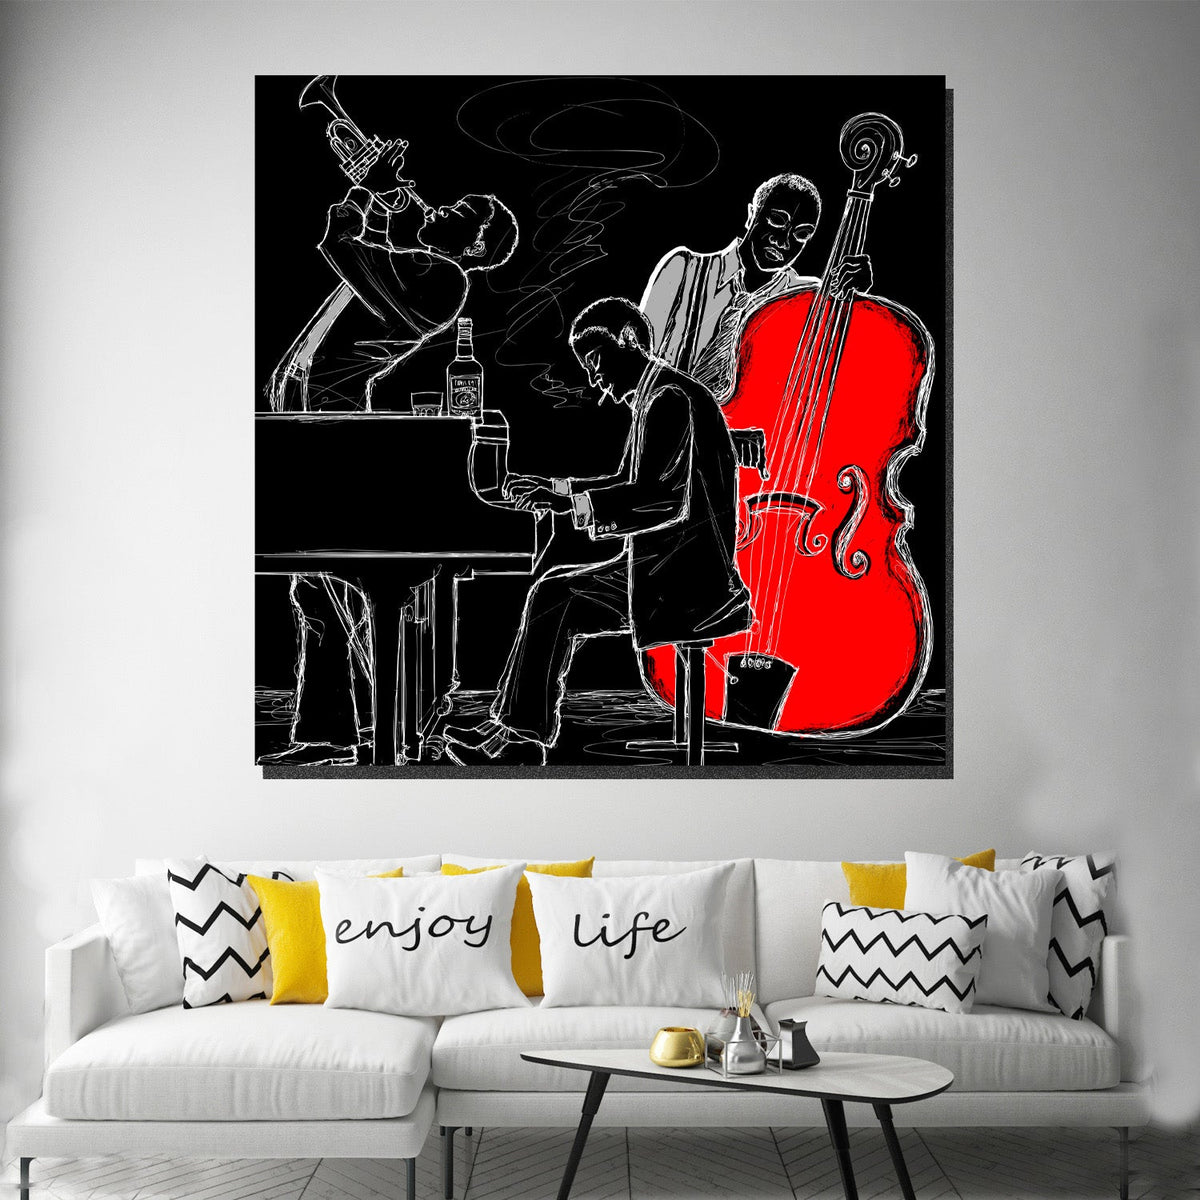 https://cdn.shopify.com/s/files/1/0387/9986/8044/products/JazzMusicBandCanvasArtprintStretched-3.jpg